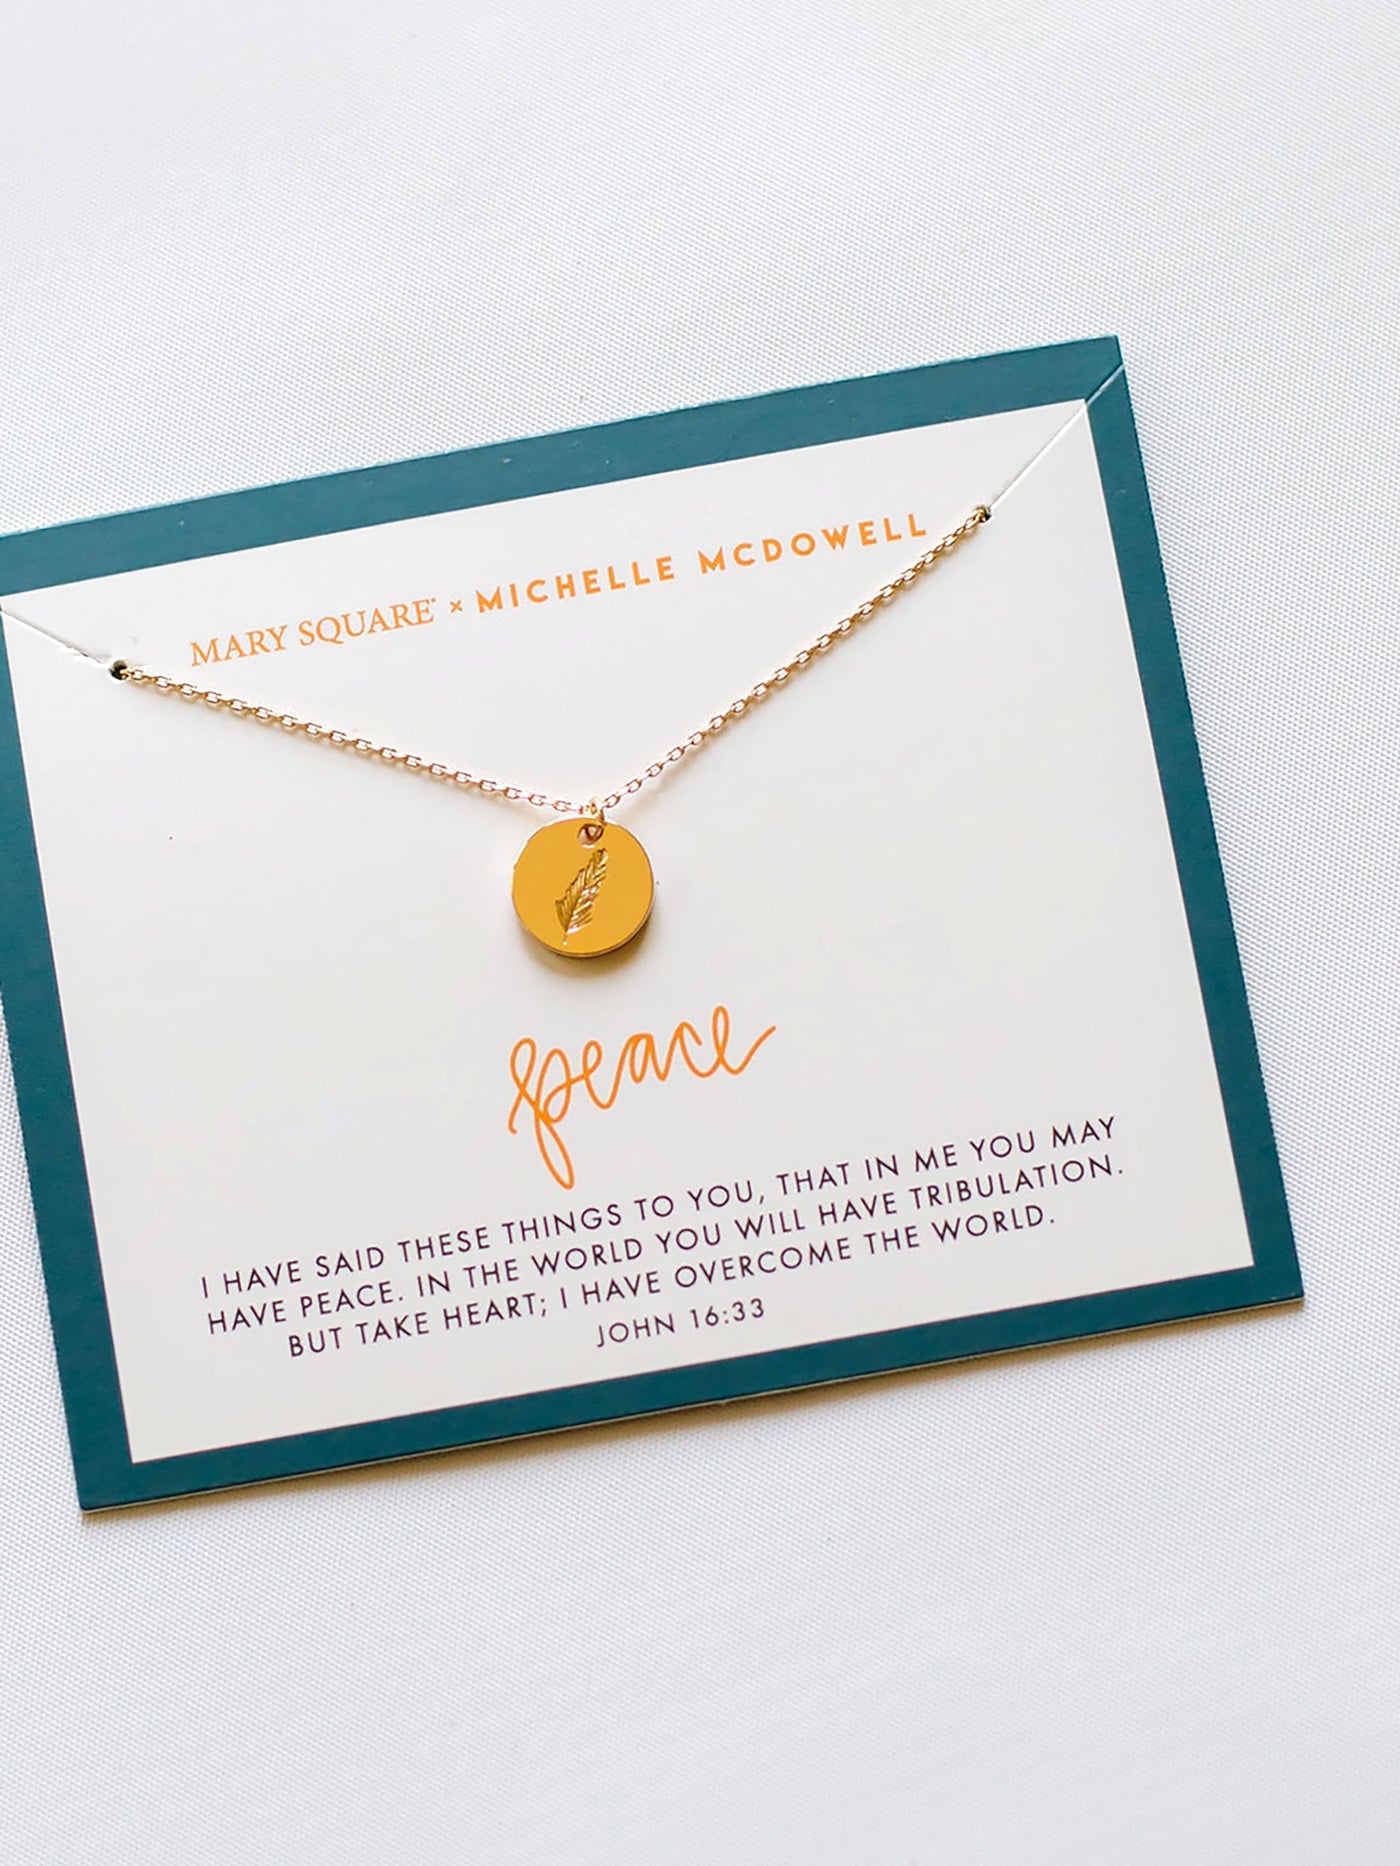 Peace Inspirational Necklace - Mary Square, LLC